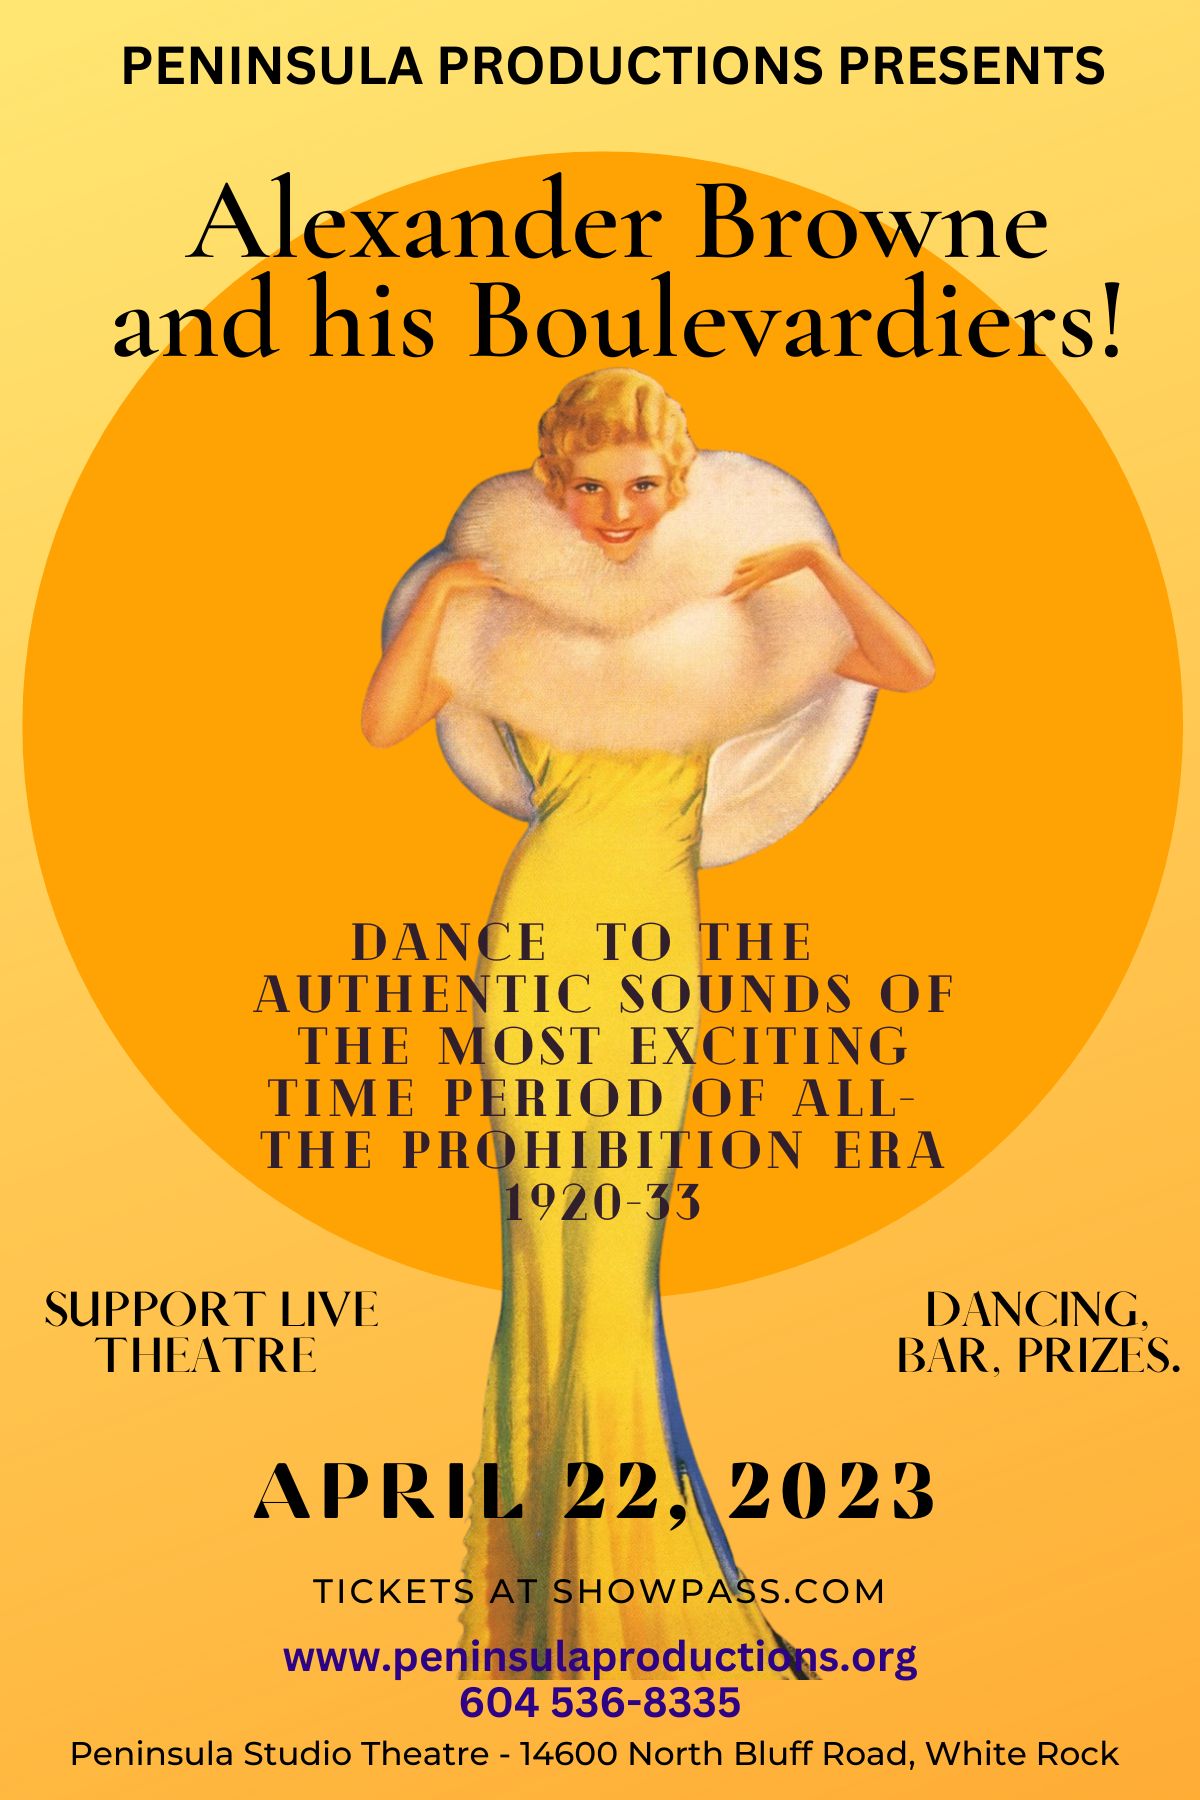 Updated Alexander Browne and his Boulevardiers poster.